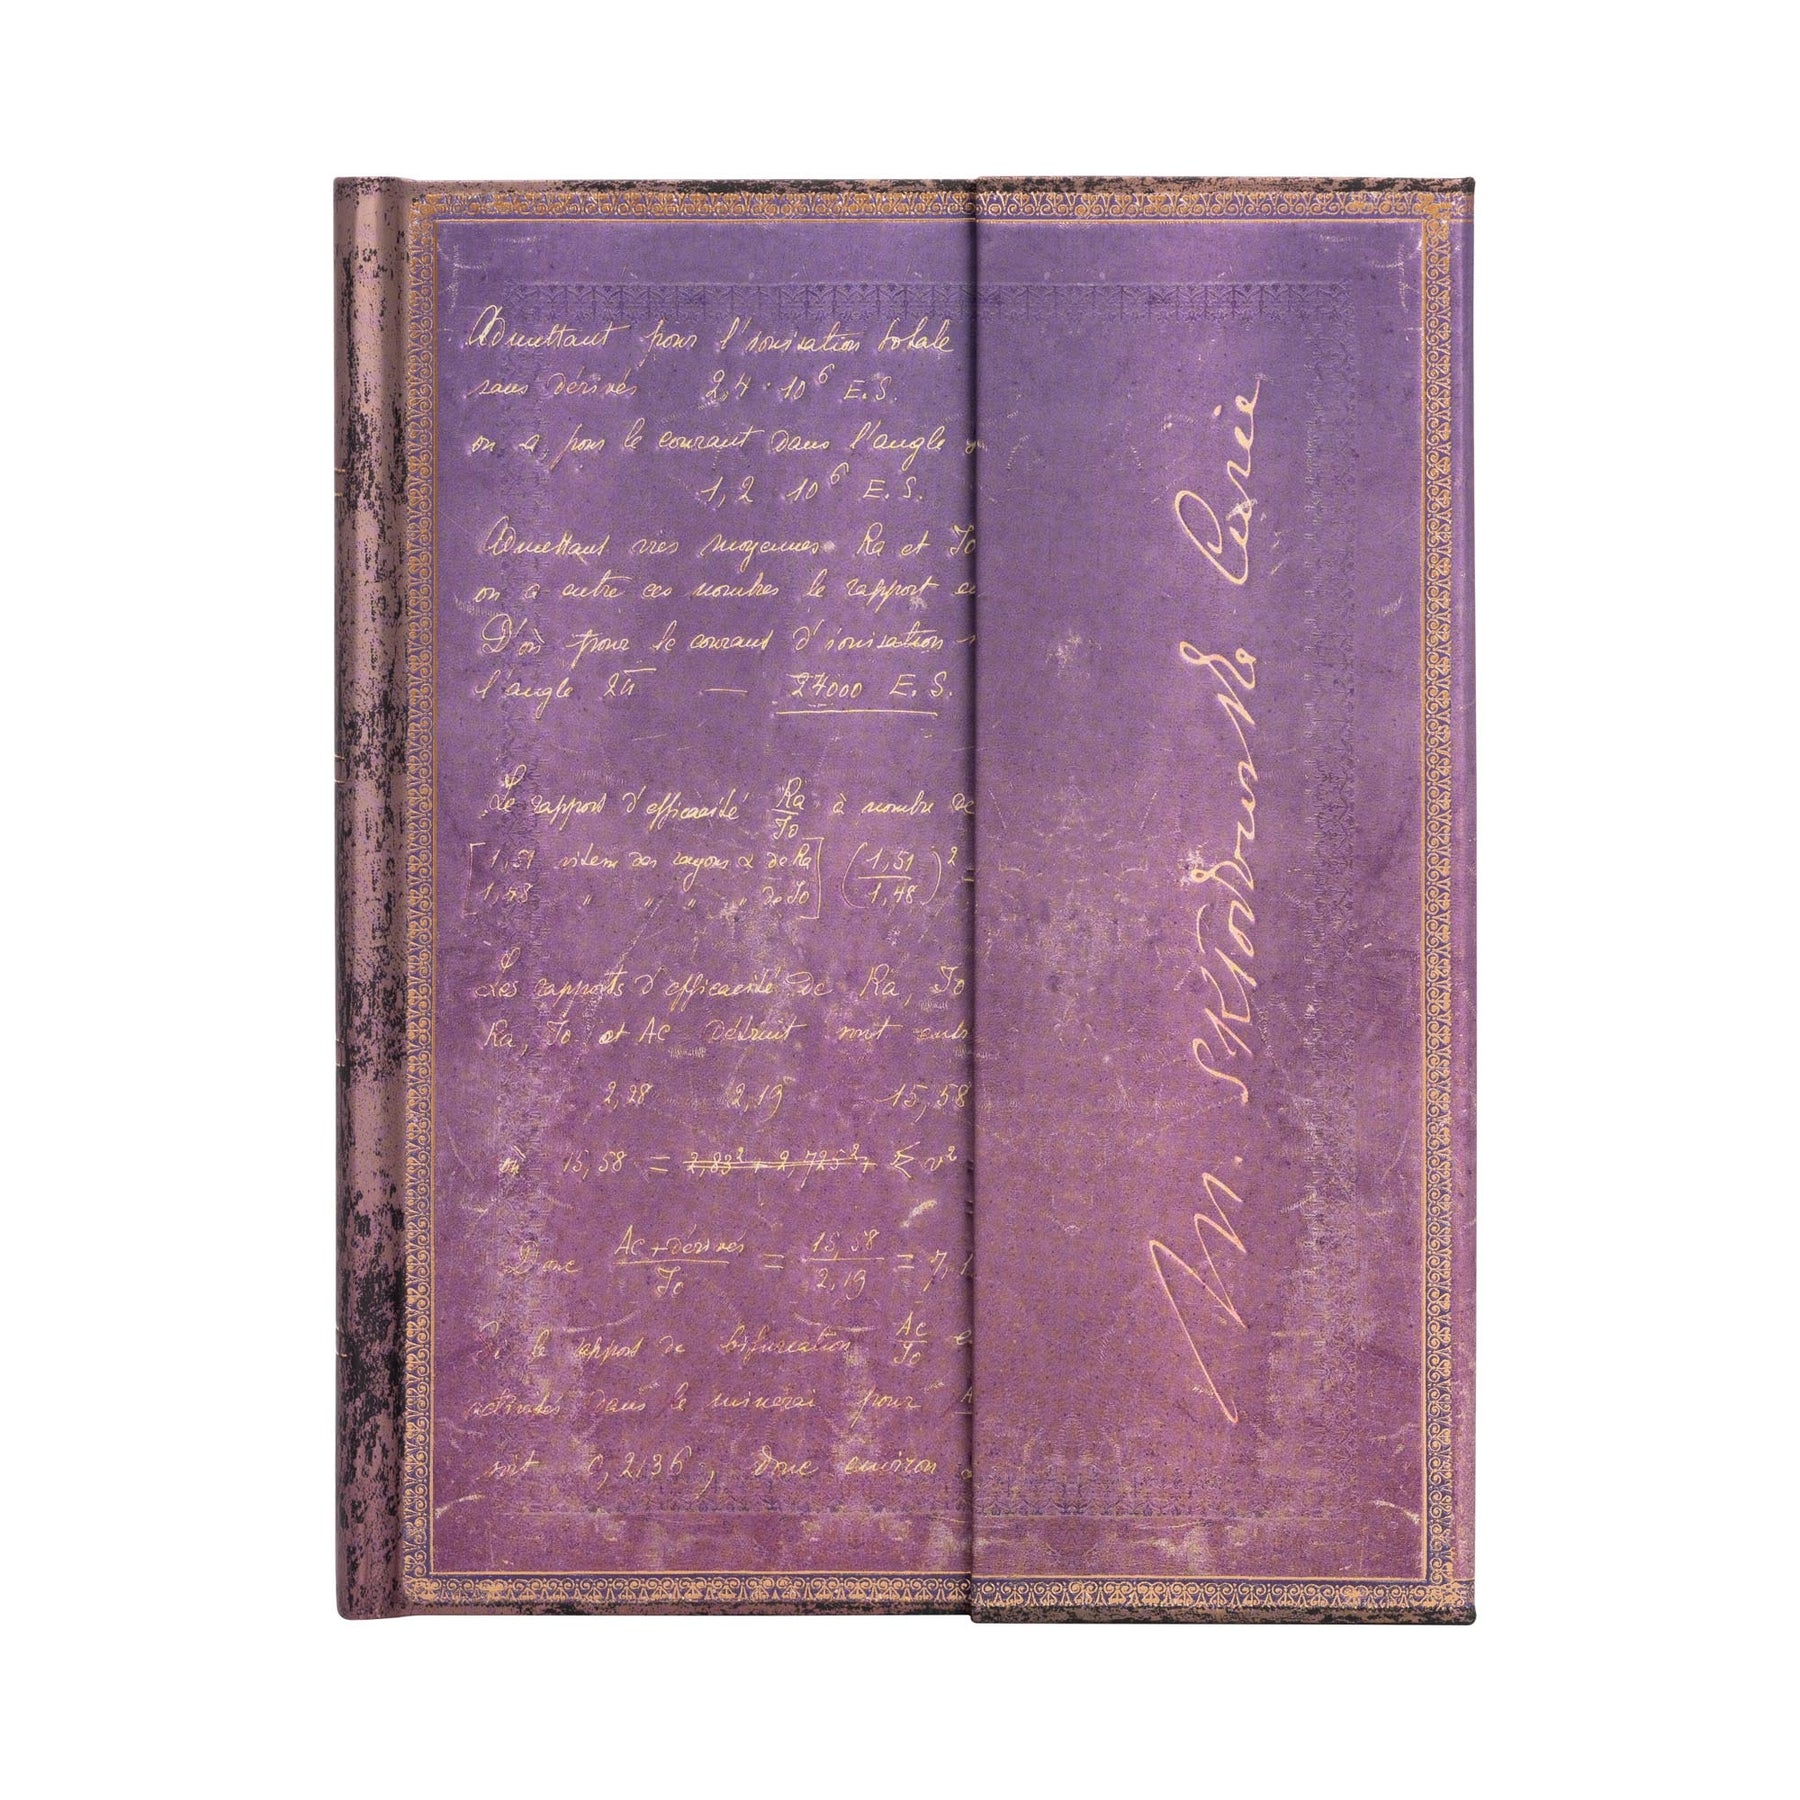 Paperblanks Embellished Manuscripts - Marie Curie, Science of Radioactivity Ultra Wrap